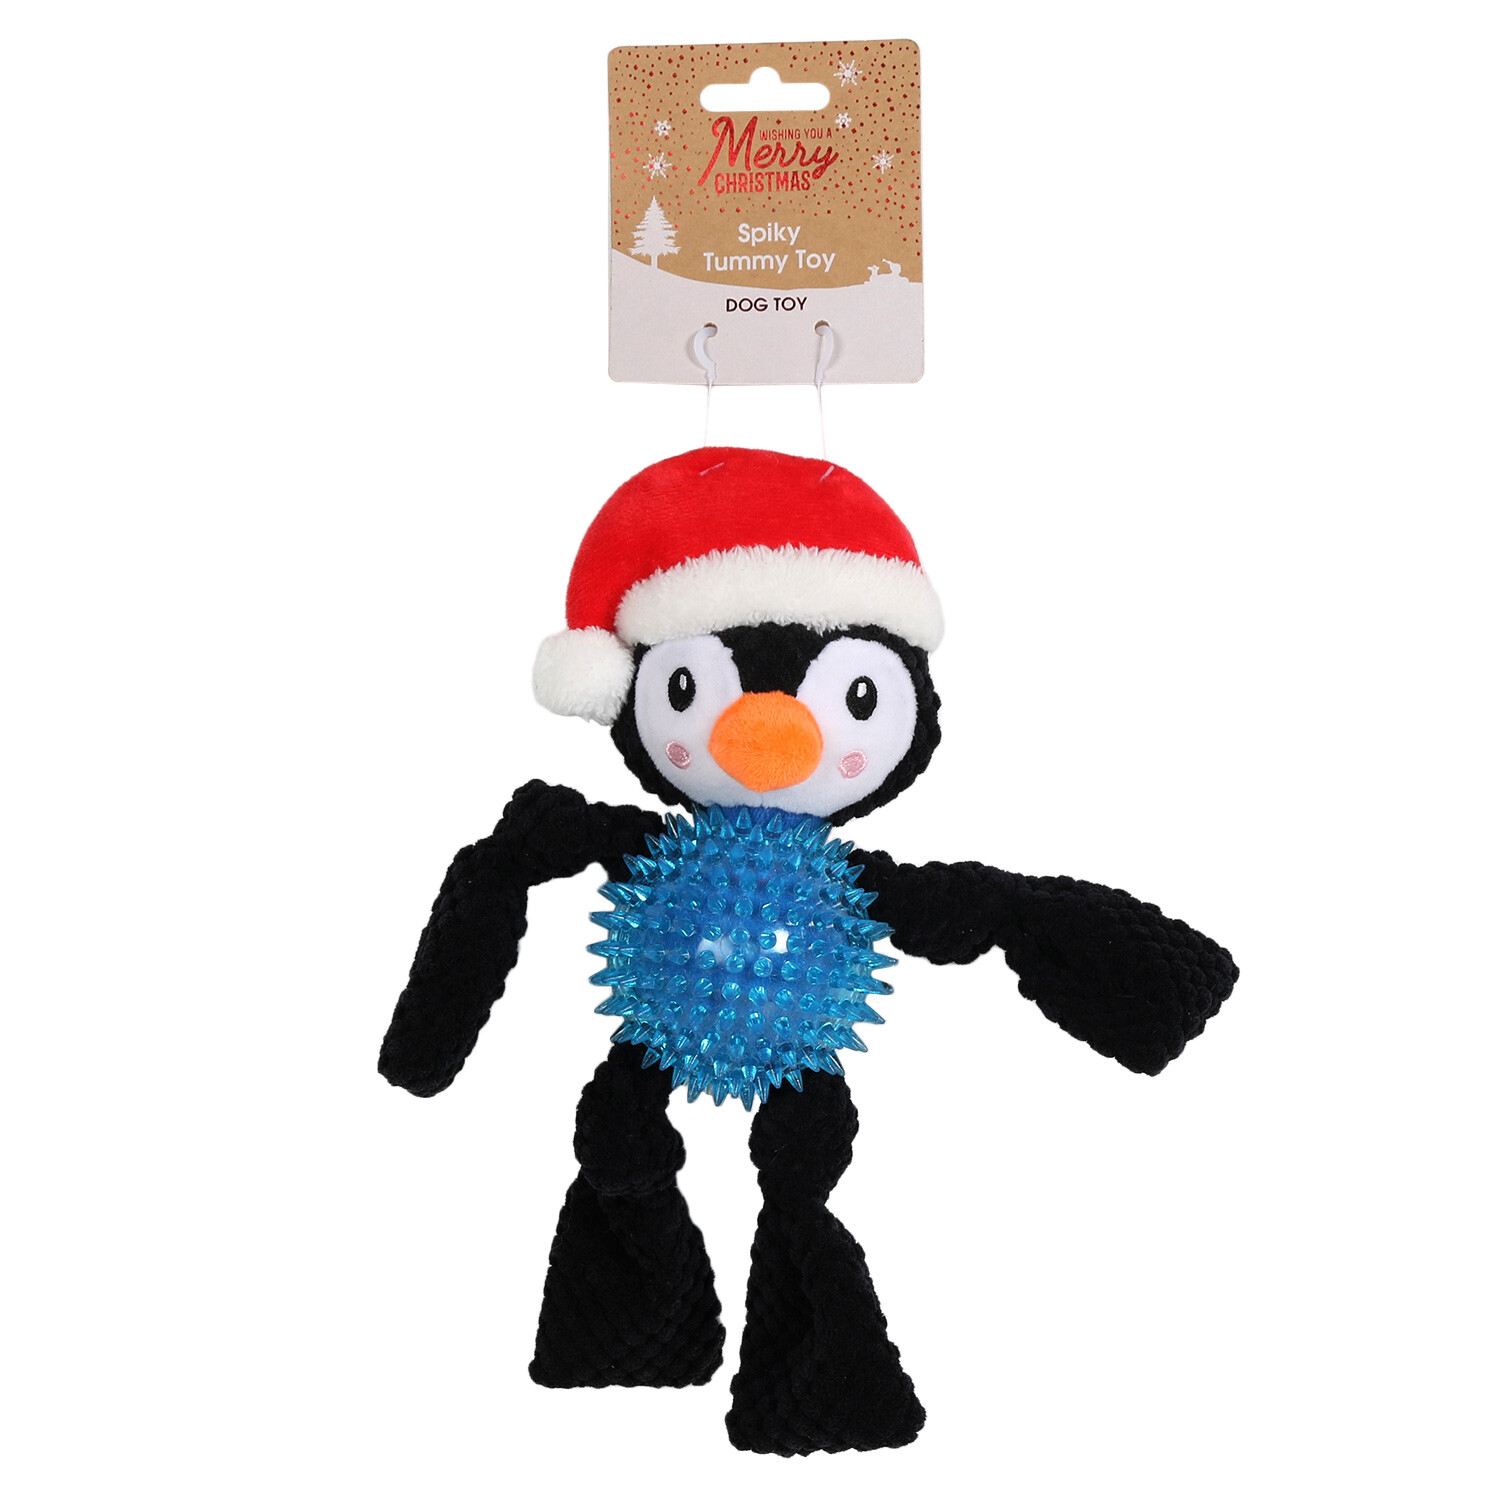 Single All I Want For Christmas Spiky Tummy Dog Toy in Assorted styles Image 3